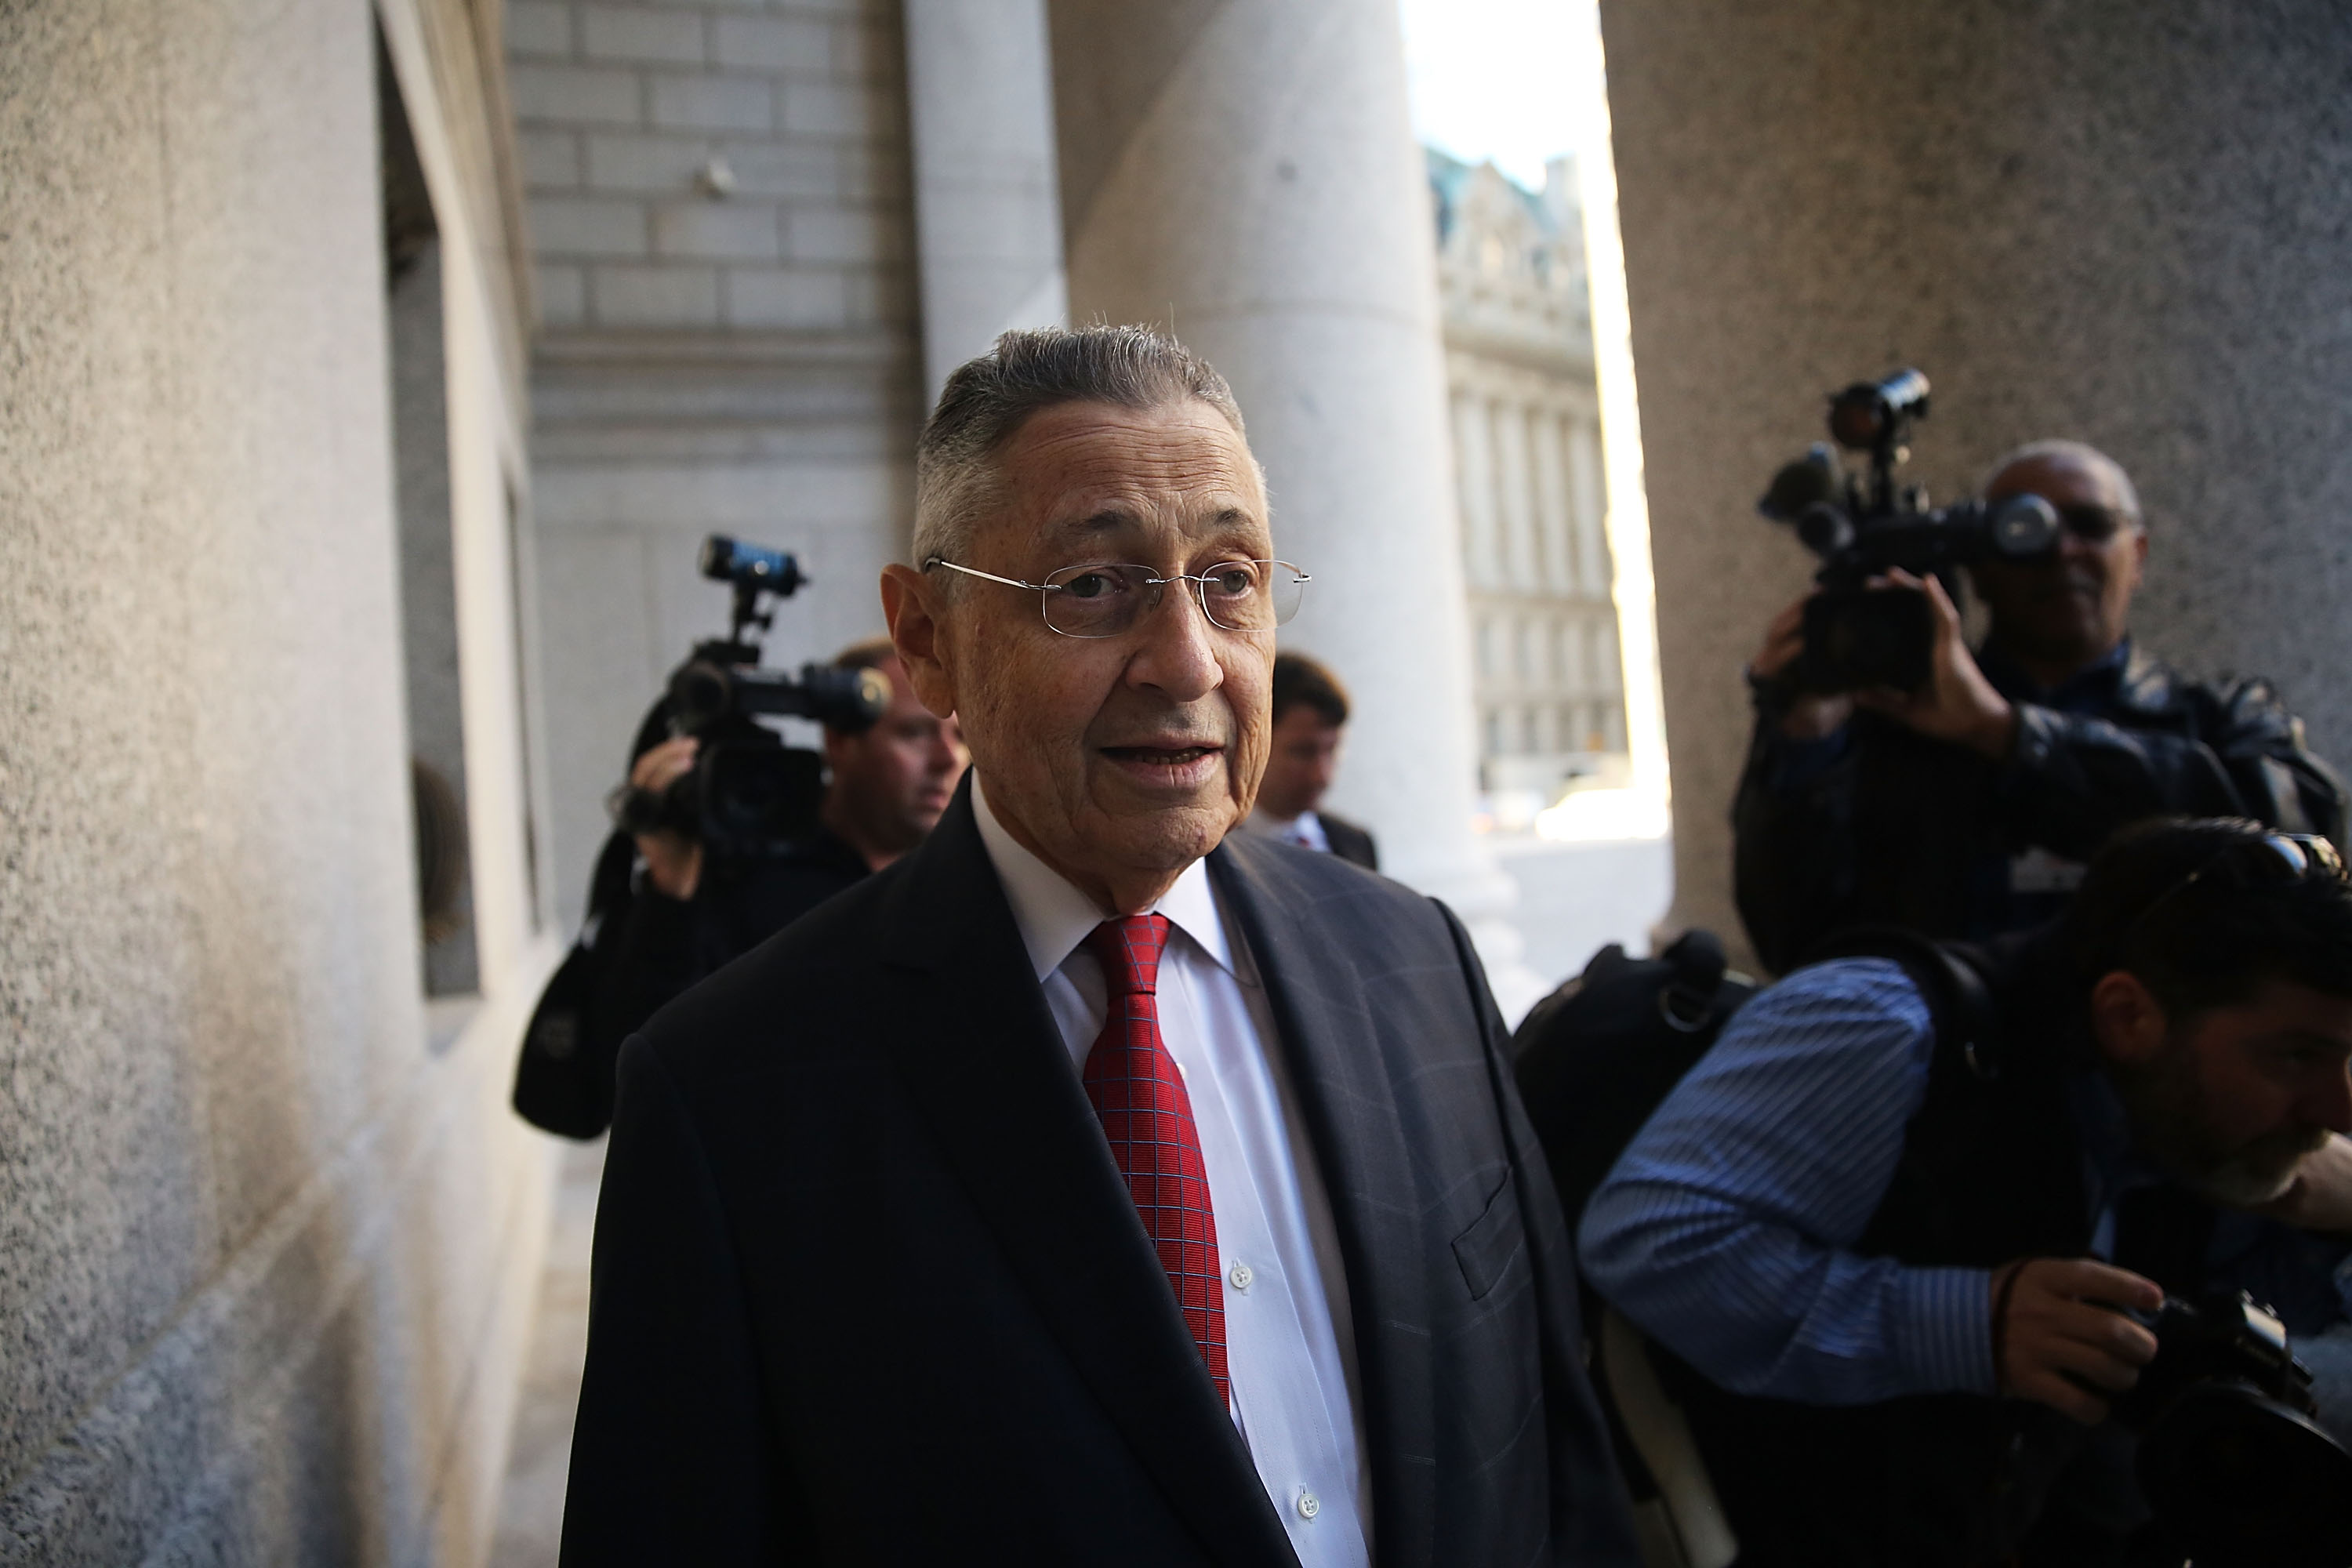 Former Assembly Speaker Sheldon Silver, whose trial continued today in federal court. (Photo: Spencer Platt for Getty Images) 